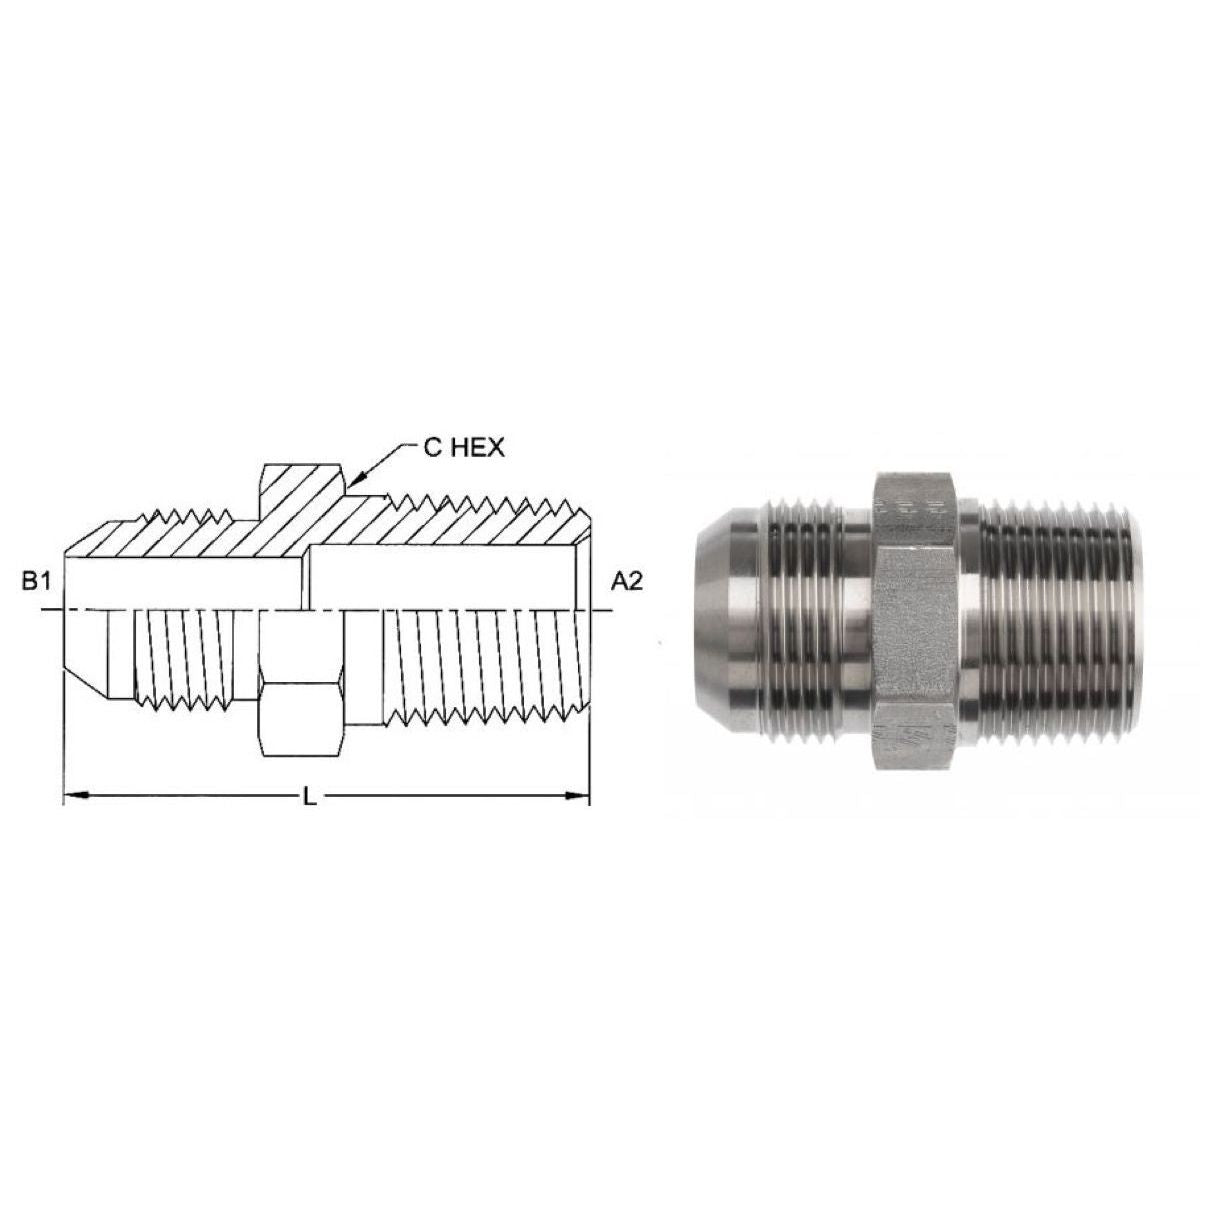 2404-08-08 : OneHydraulics Adapter, Straight, 0.5 (1/2") Male NPT x 0.5 (1/2") Male, Steel, 6000psi